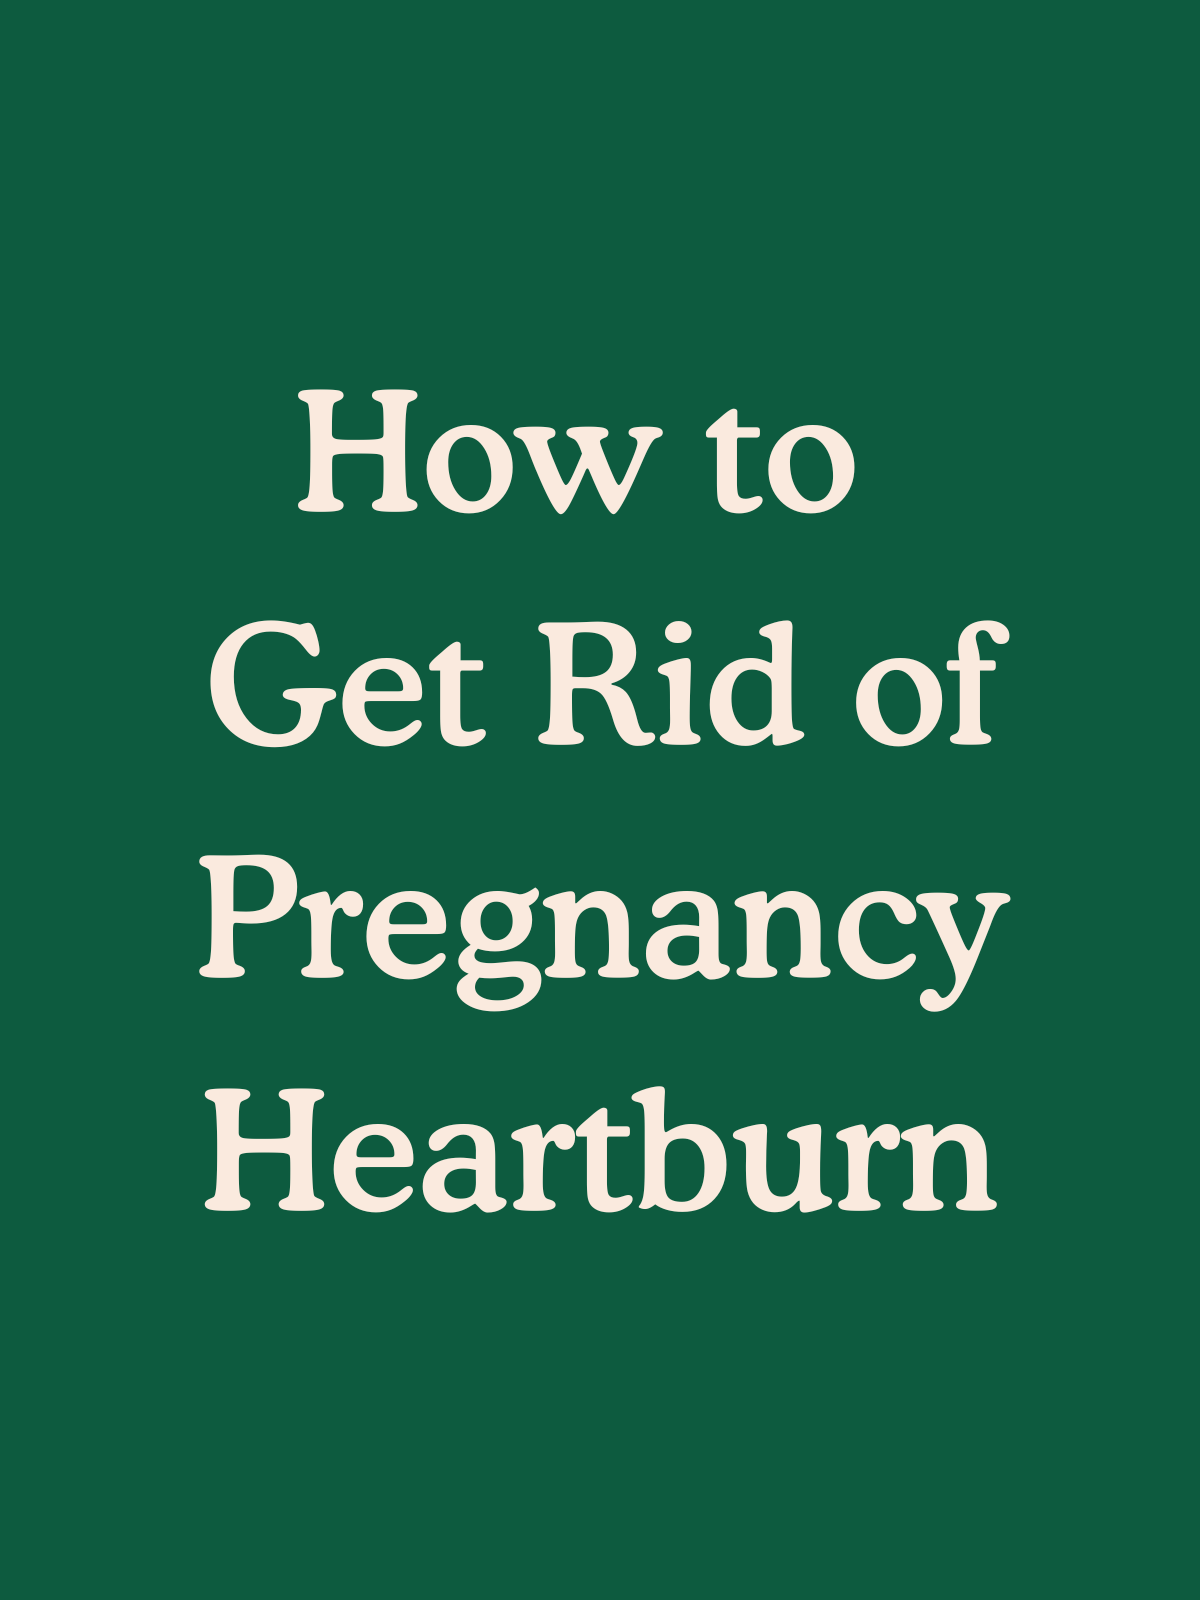 How to Get Rid of Pregnancy Heartburn